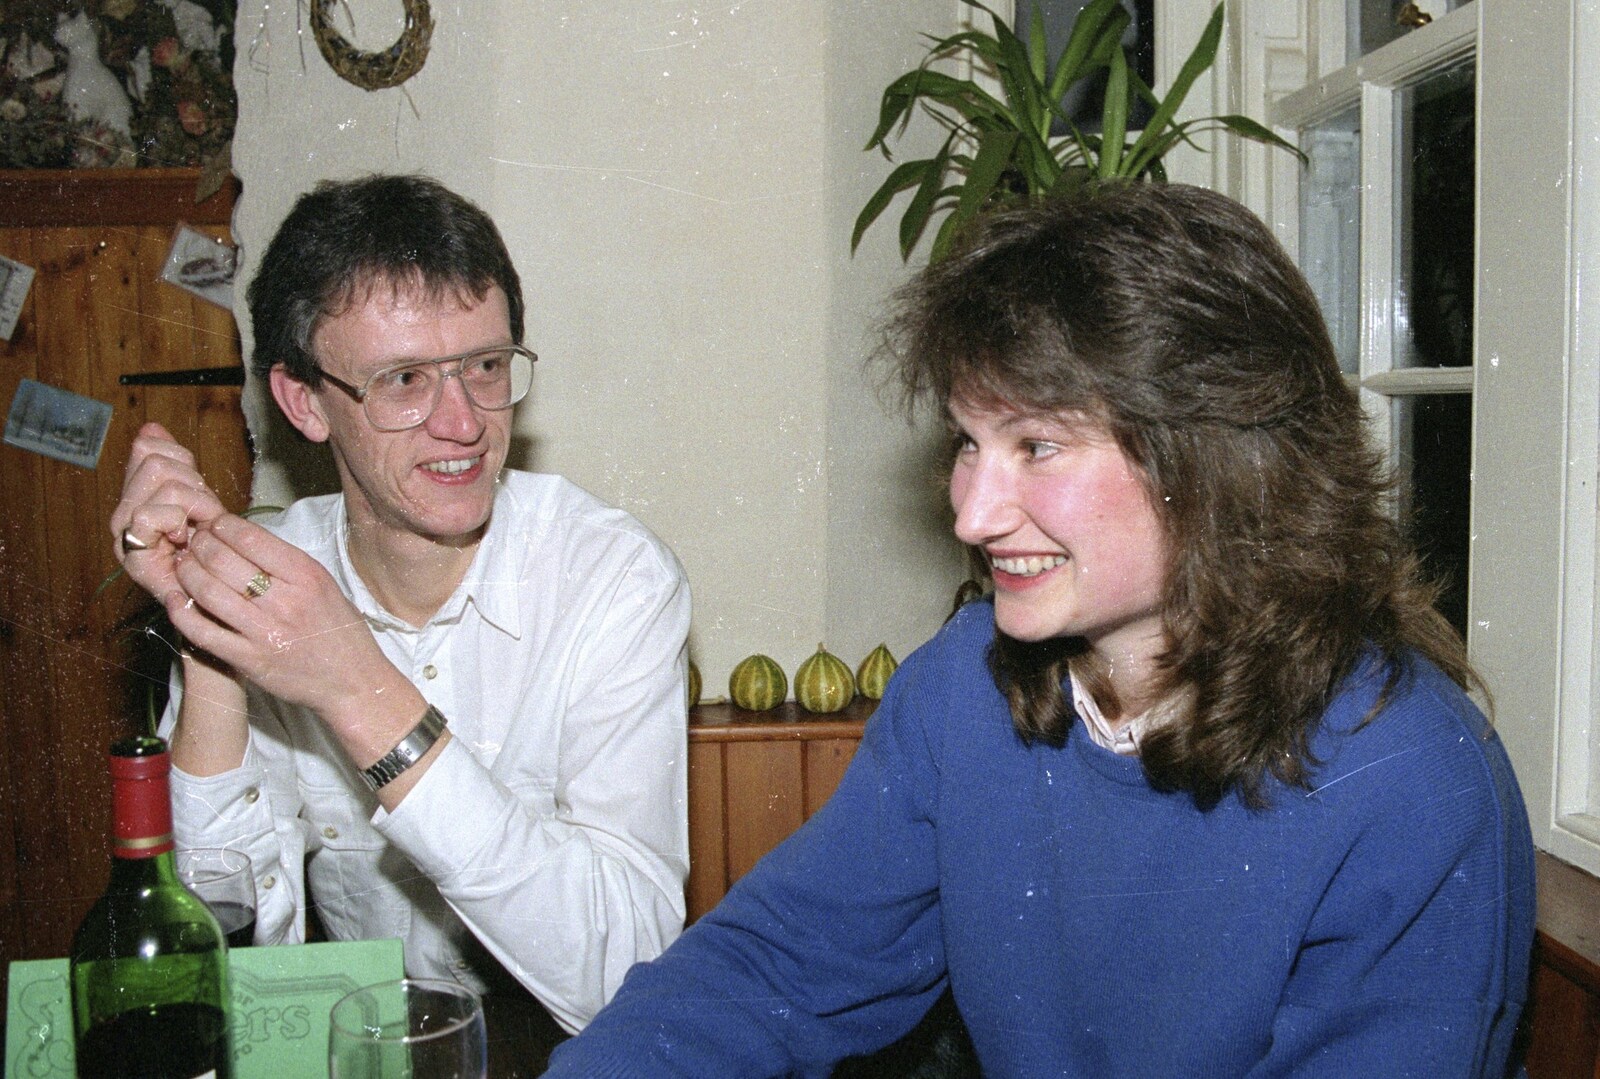 Angela and her geezer in Boaters from Totnes Pre-Christmas, Devon - 19th December 1990